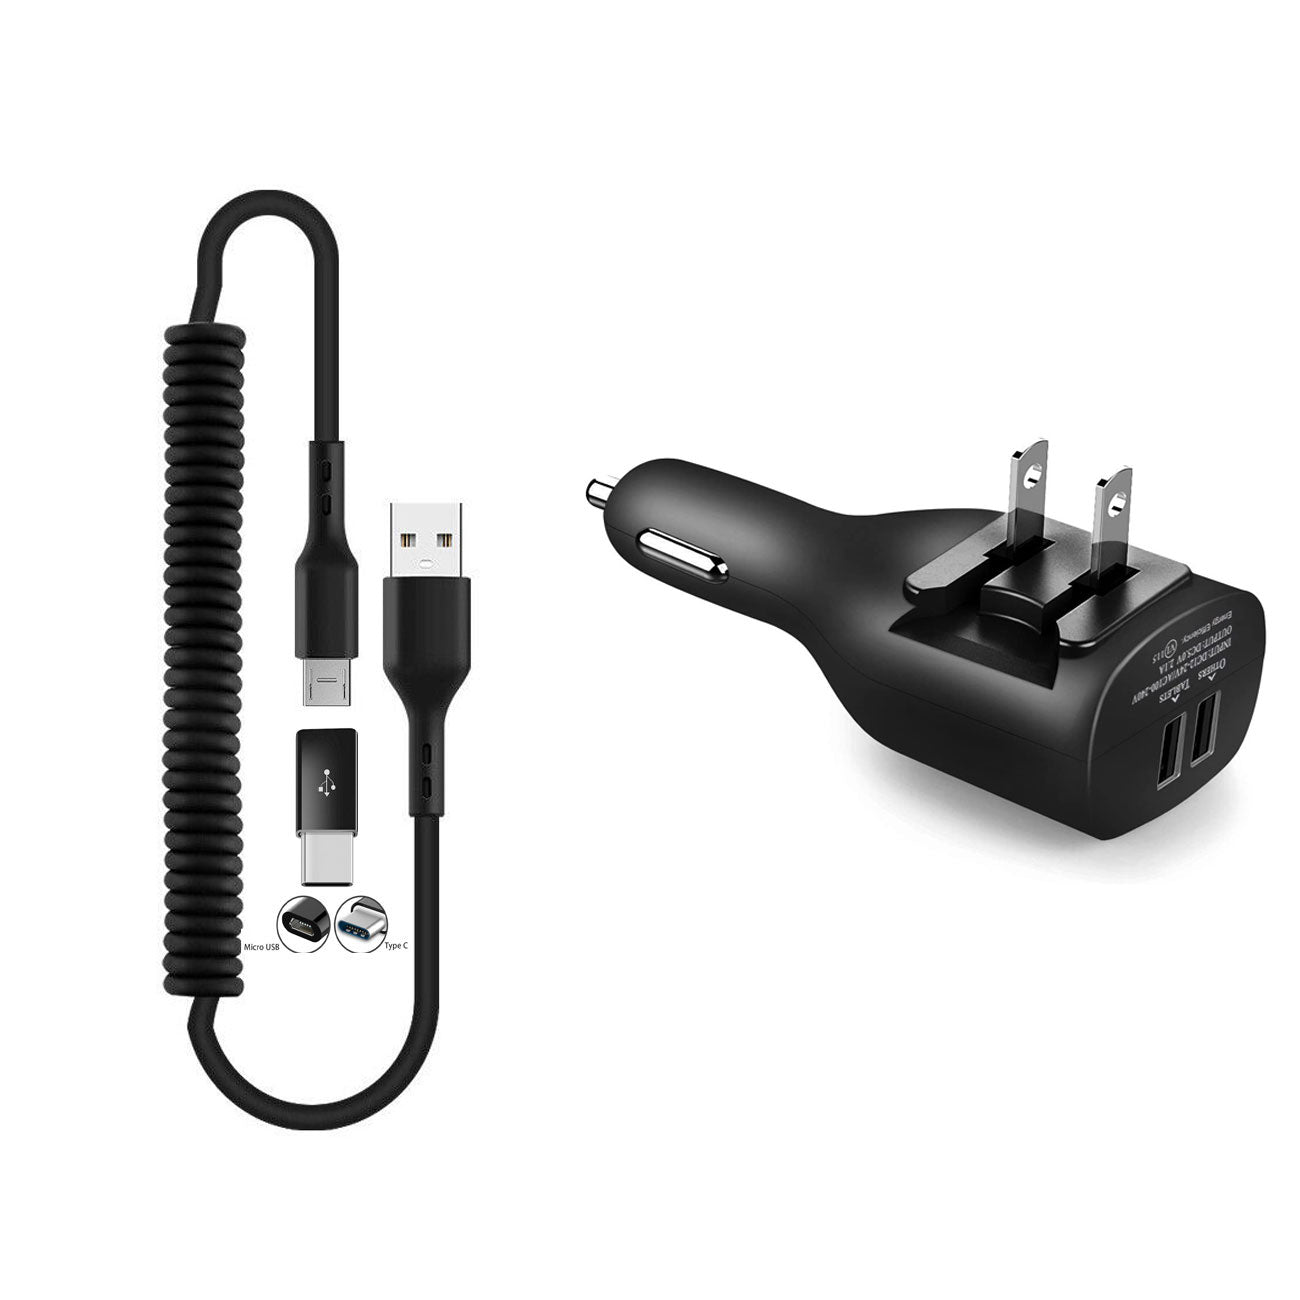 2-in-1 Car Home Charger Coiled USB Cable Micro-USB to USB-C Adapter Charger Cord Power Wire Black - ONE96